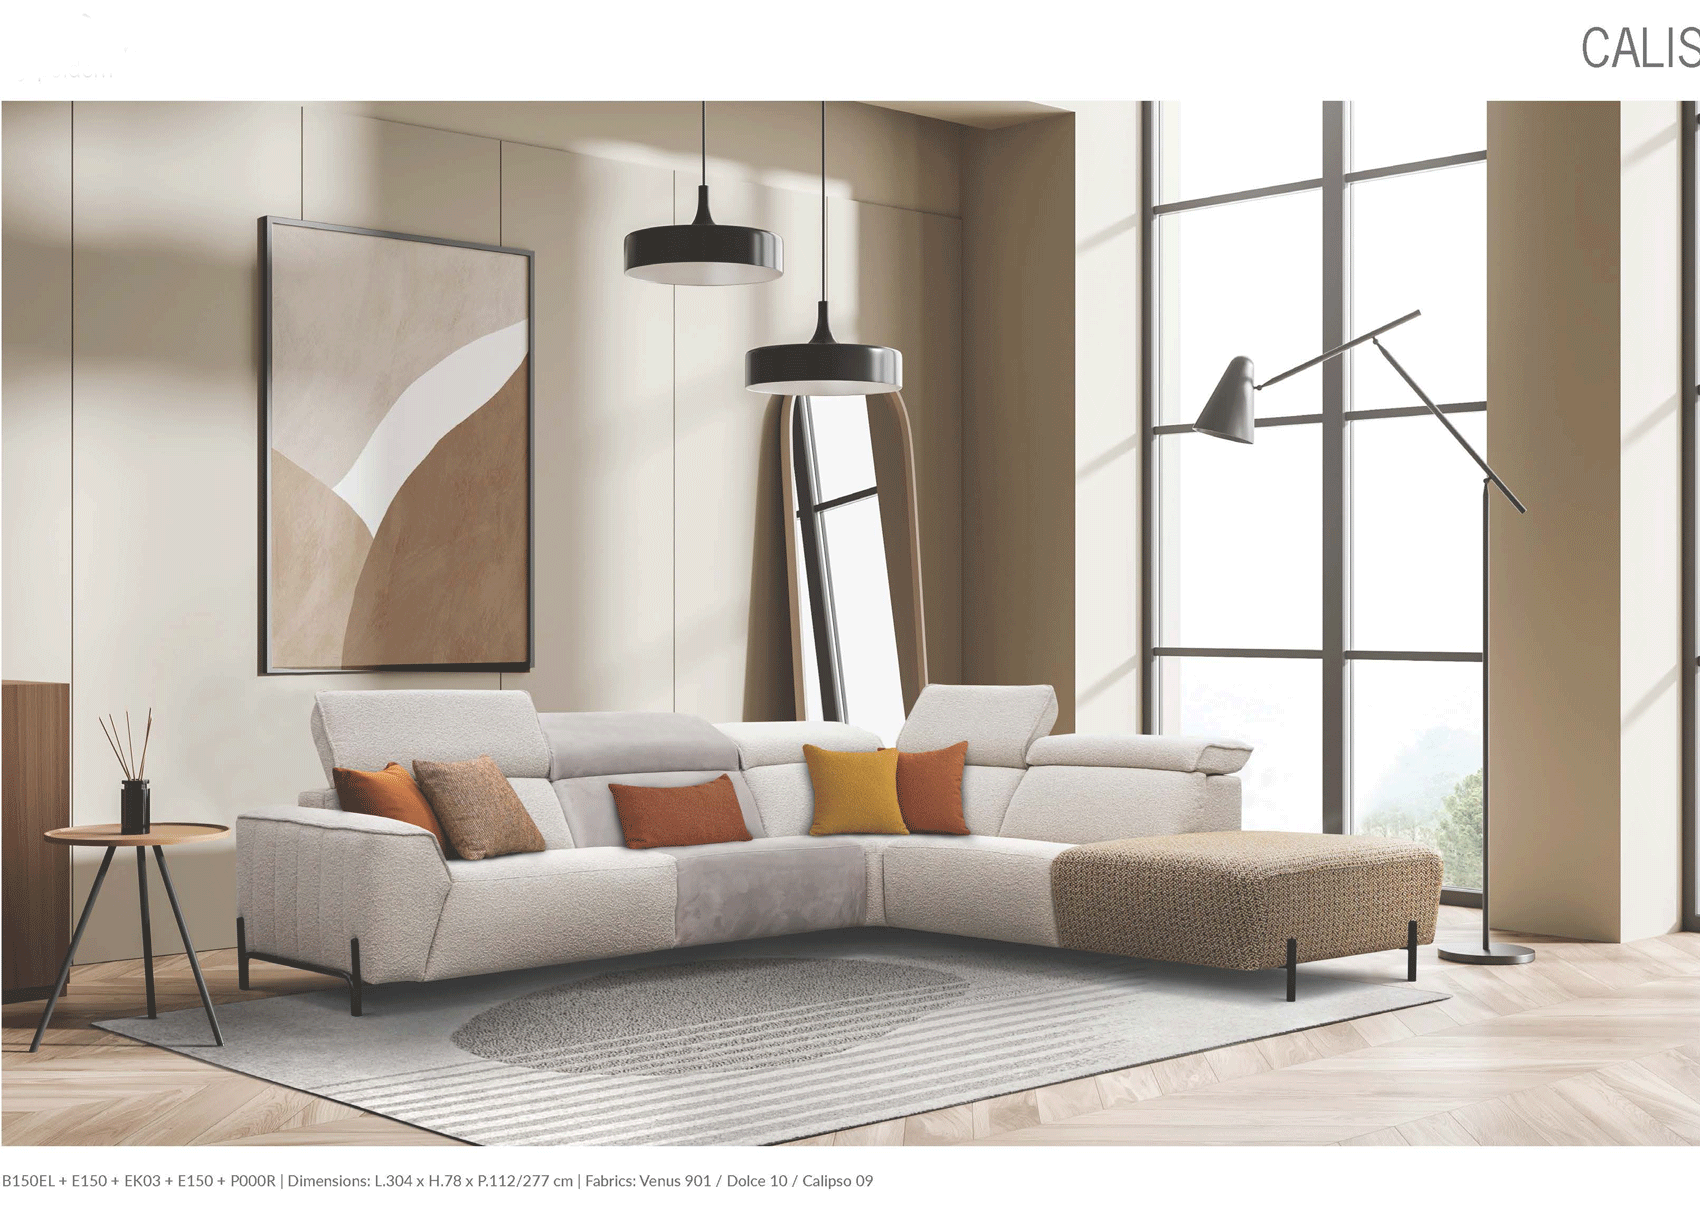 Brands European Living Collection Calis Sectional